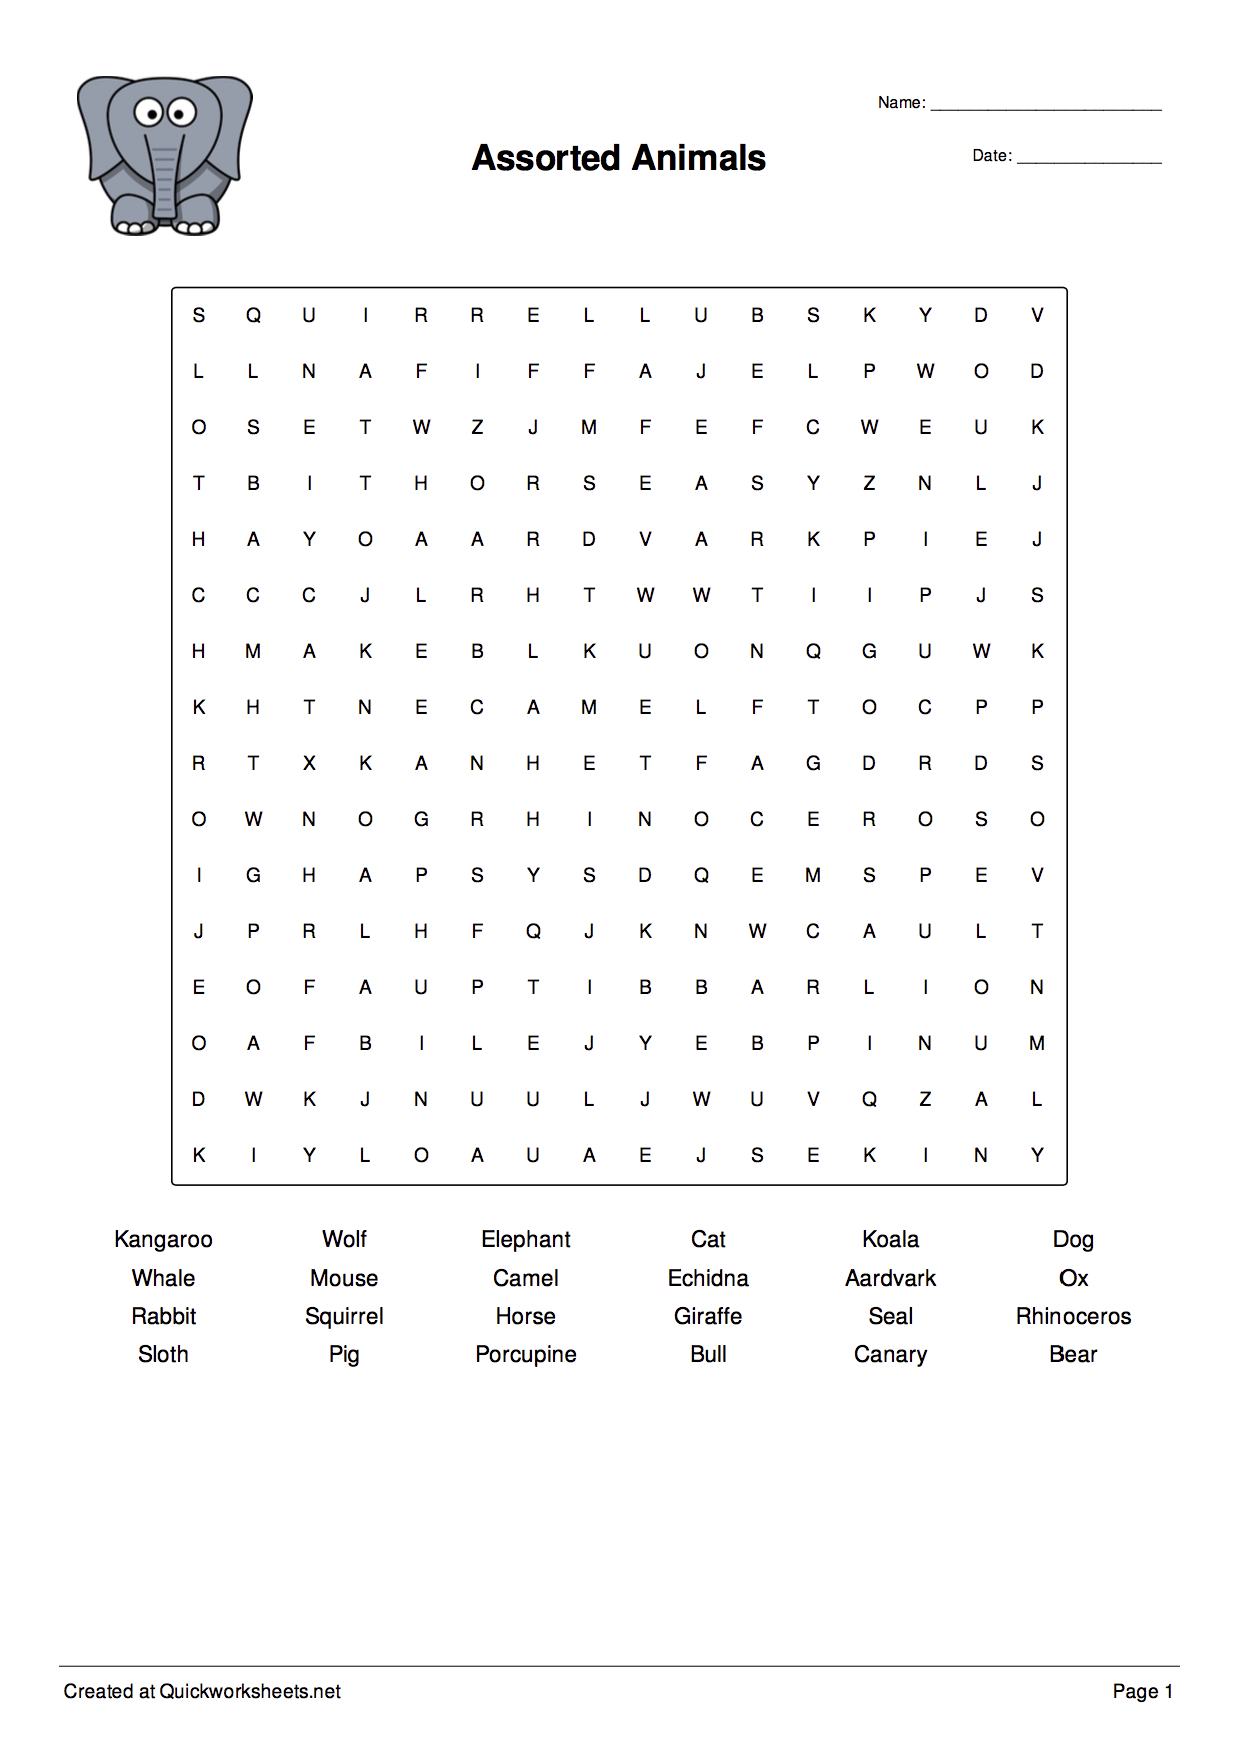 Word Scramble, Wordsearch, Crossword, Matching Pairs And Other - Free Printable Spelling Worksheet Generator